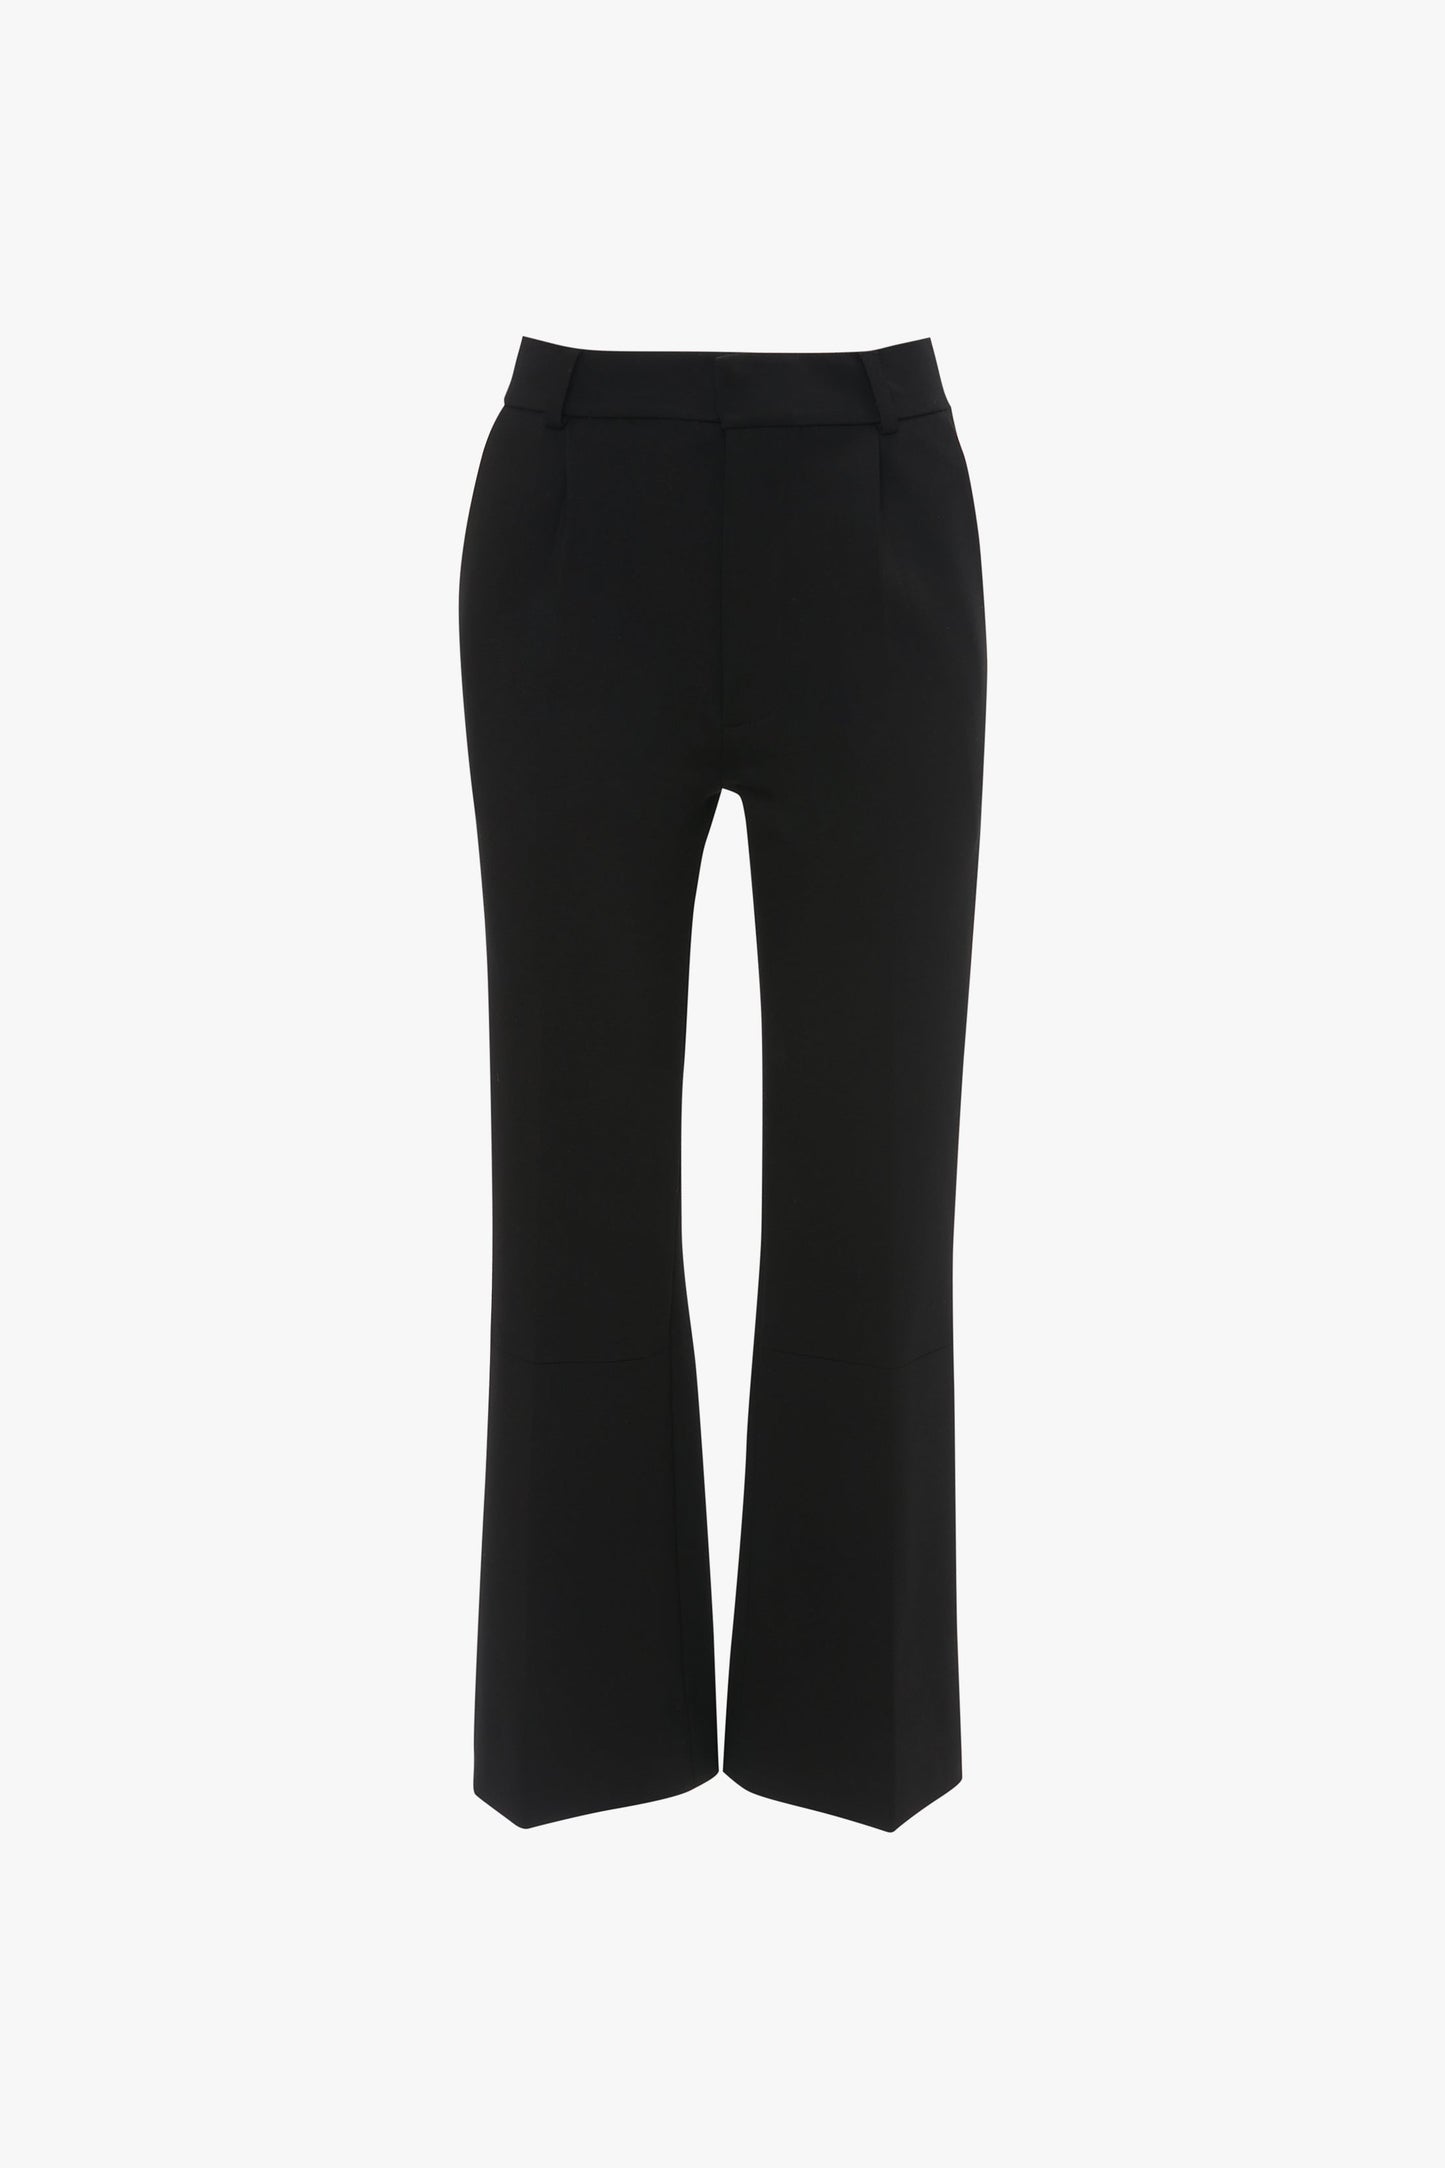 A pair of Cropped Kick Trousers In Black by Victoria Beckham, exemplifying a minimalist aesthetic, shown against a white background.